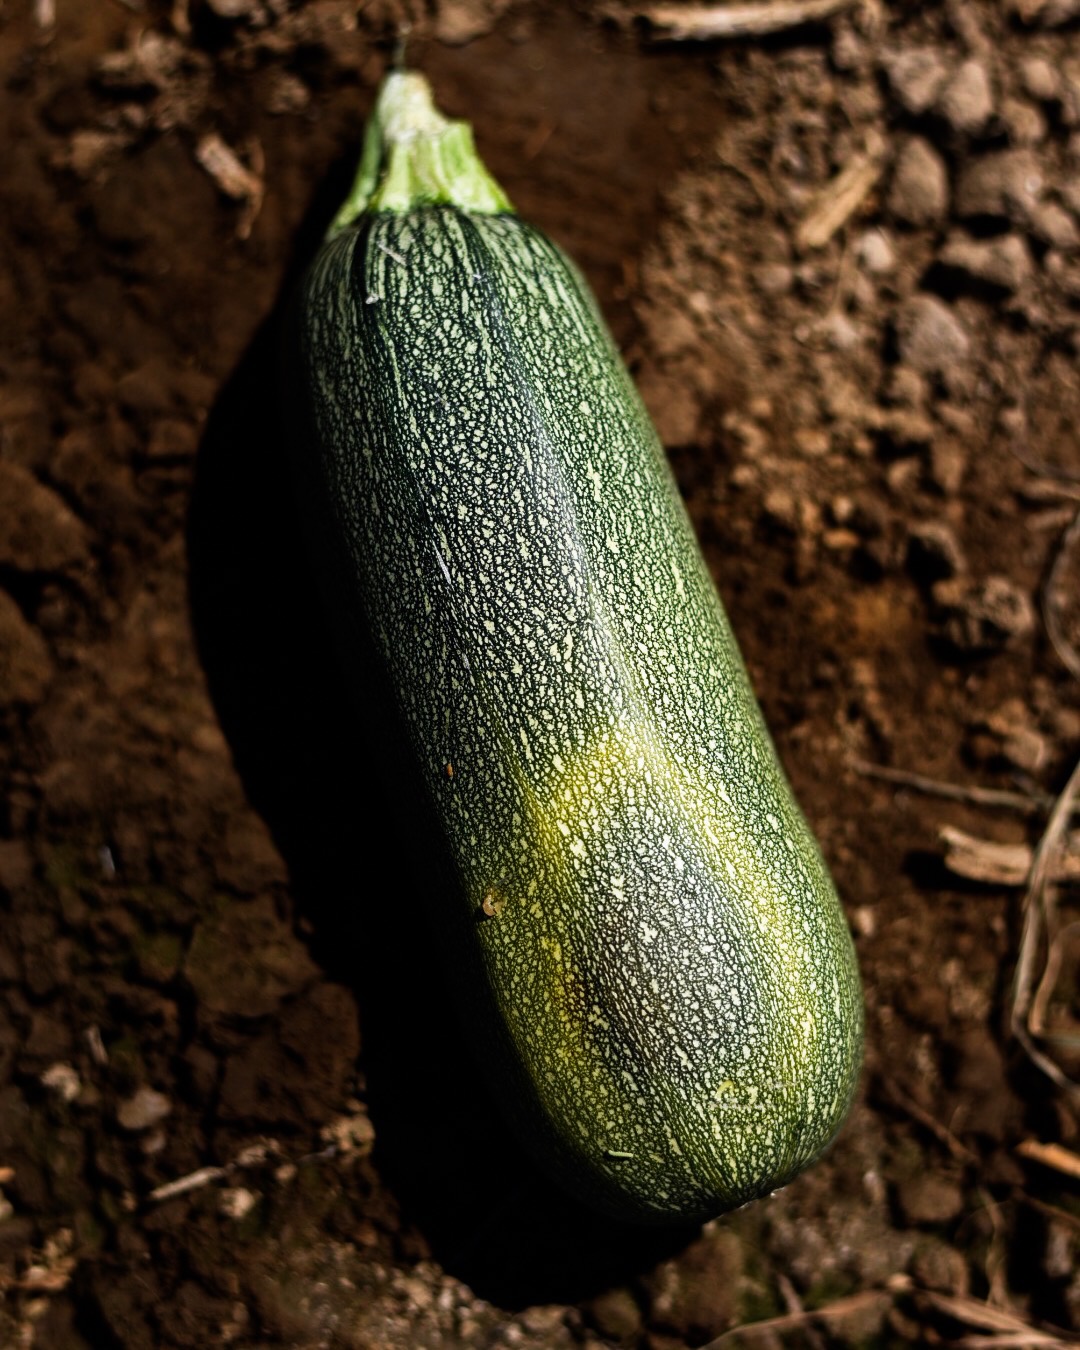 Grey squash in the soil at Thao Family Farms